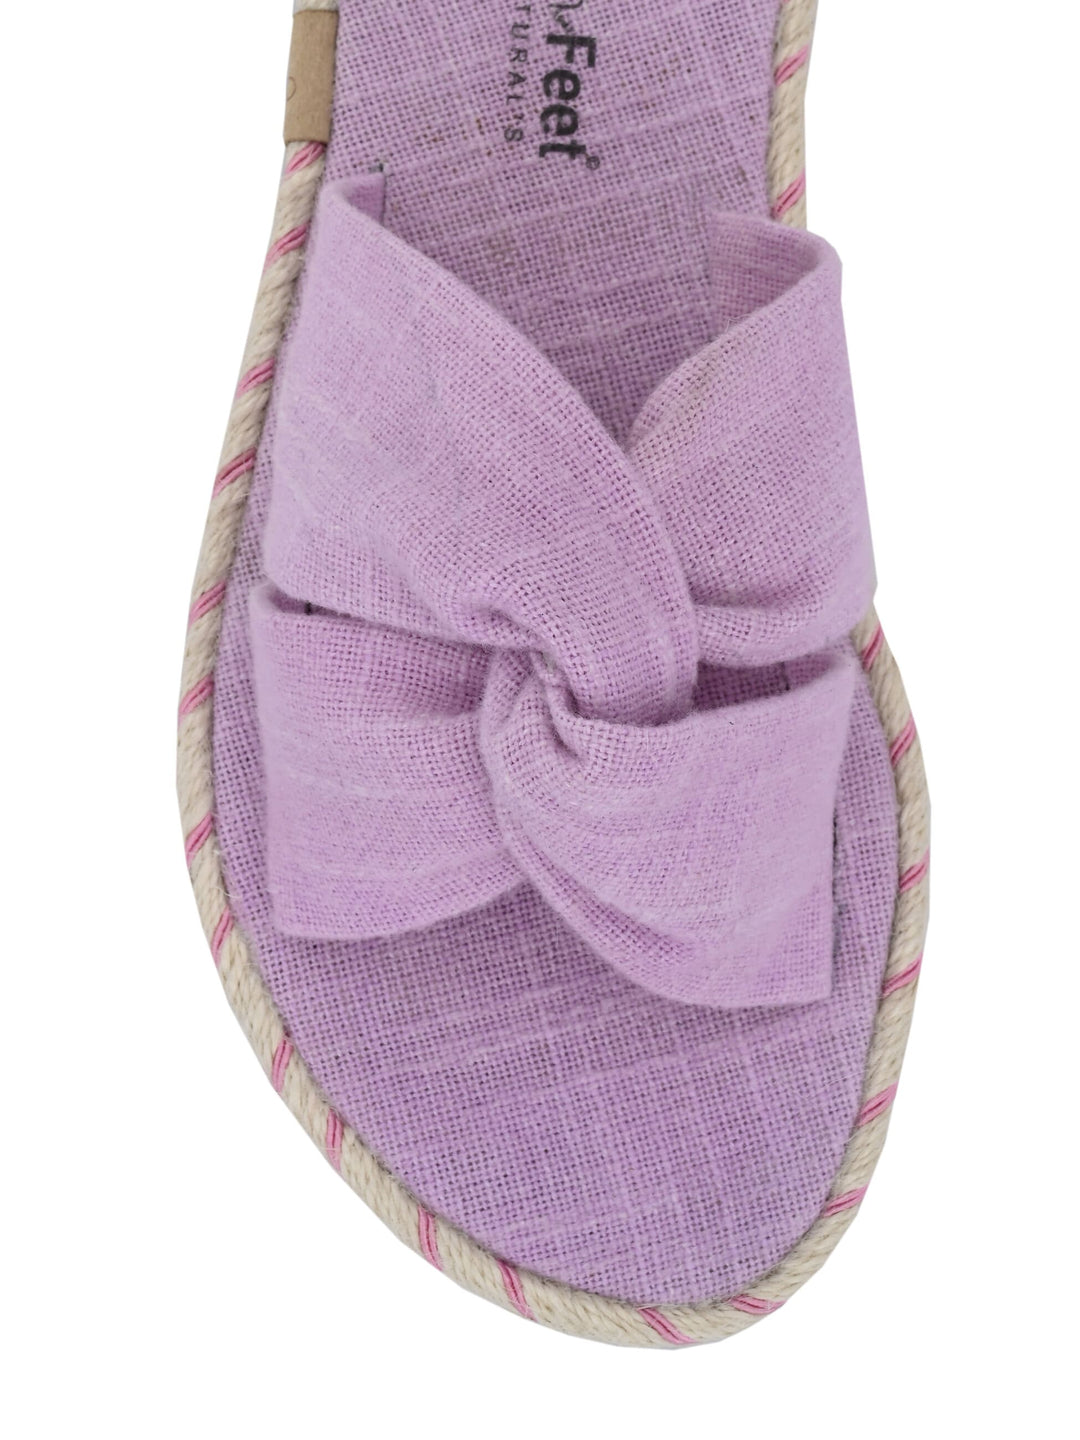 Diana Brushed Purple Sandals for Women